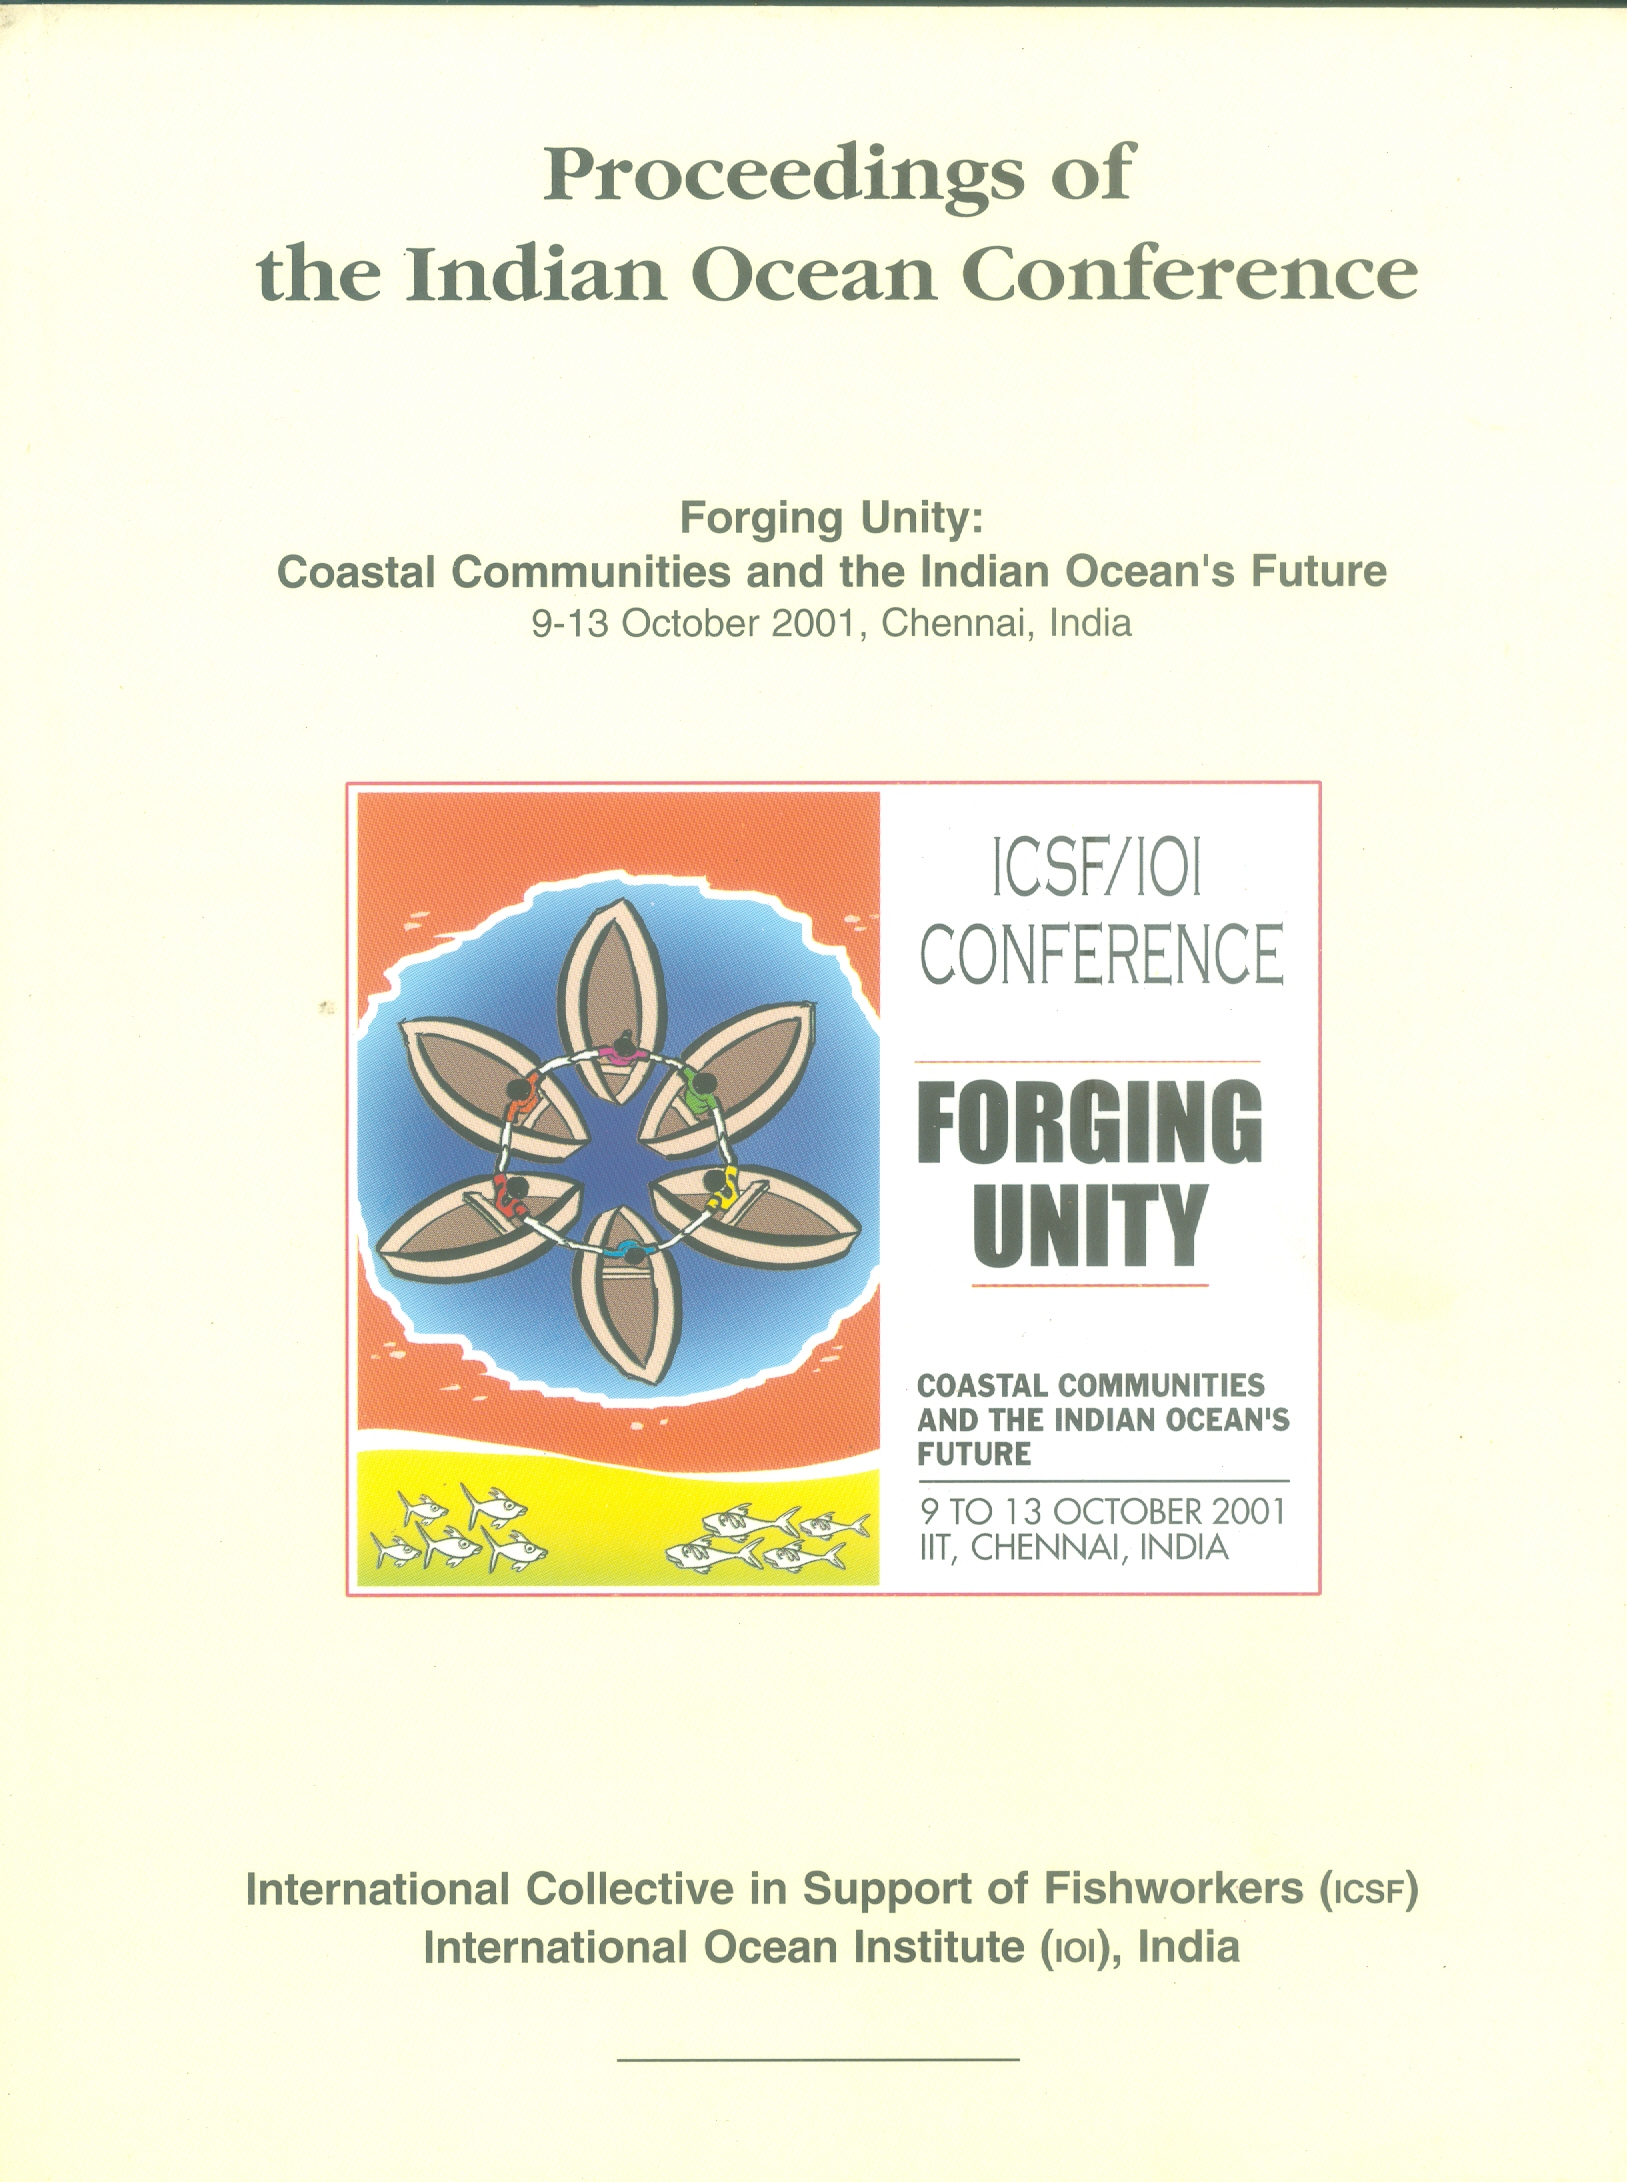 Proceedings of the Indian Ocean Conference- Forging Unity: Coastal Communities and the Indian Ocean’s Future, 9-13 October 2001, India